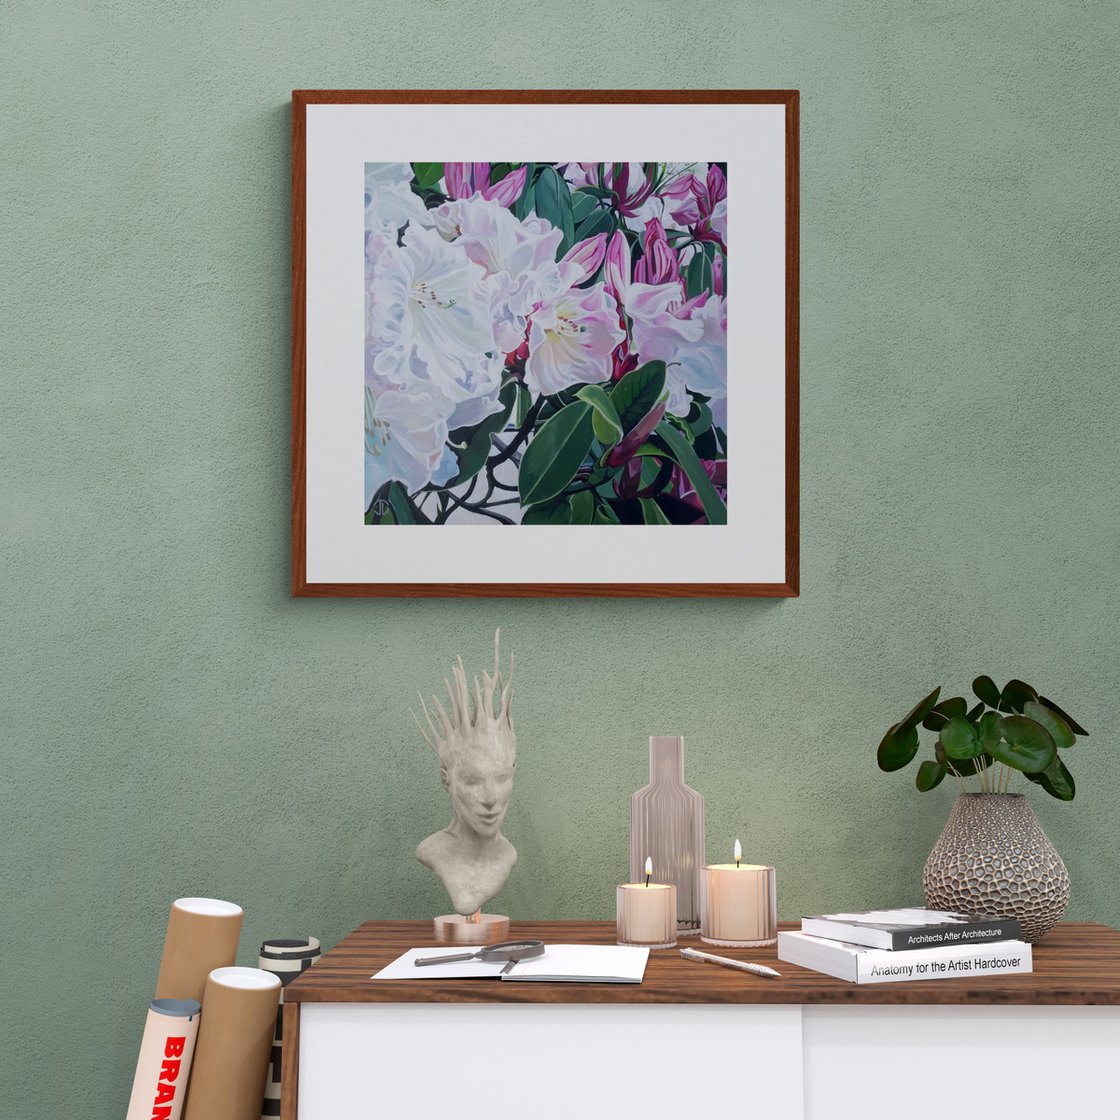 Rhododendrons At Rowallane Acrylic painting by Joseph Lynch | Artfinder